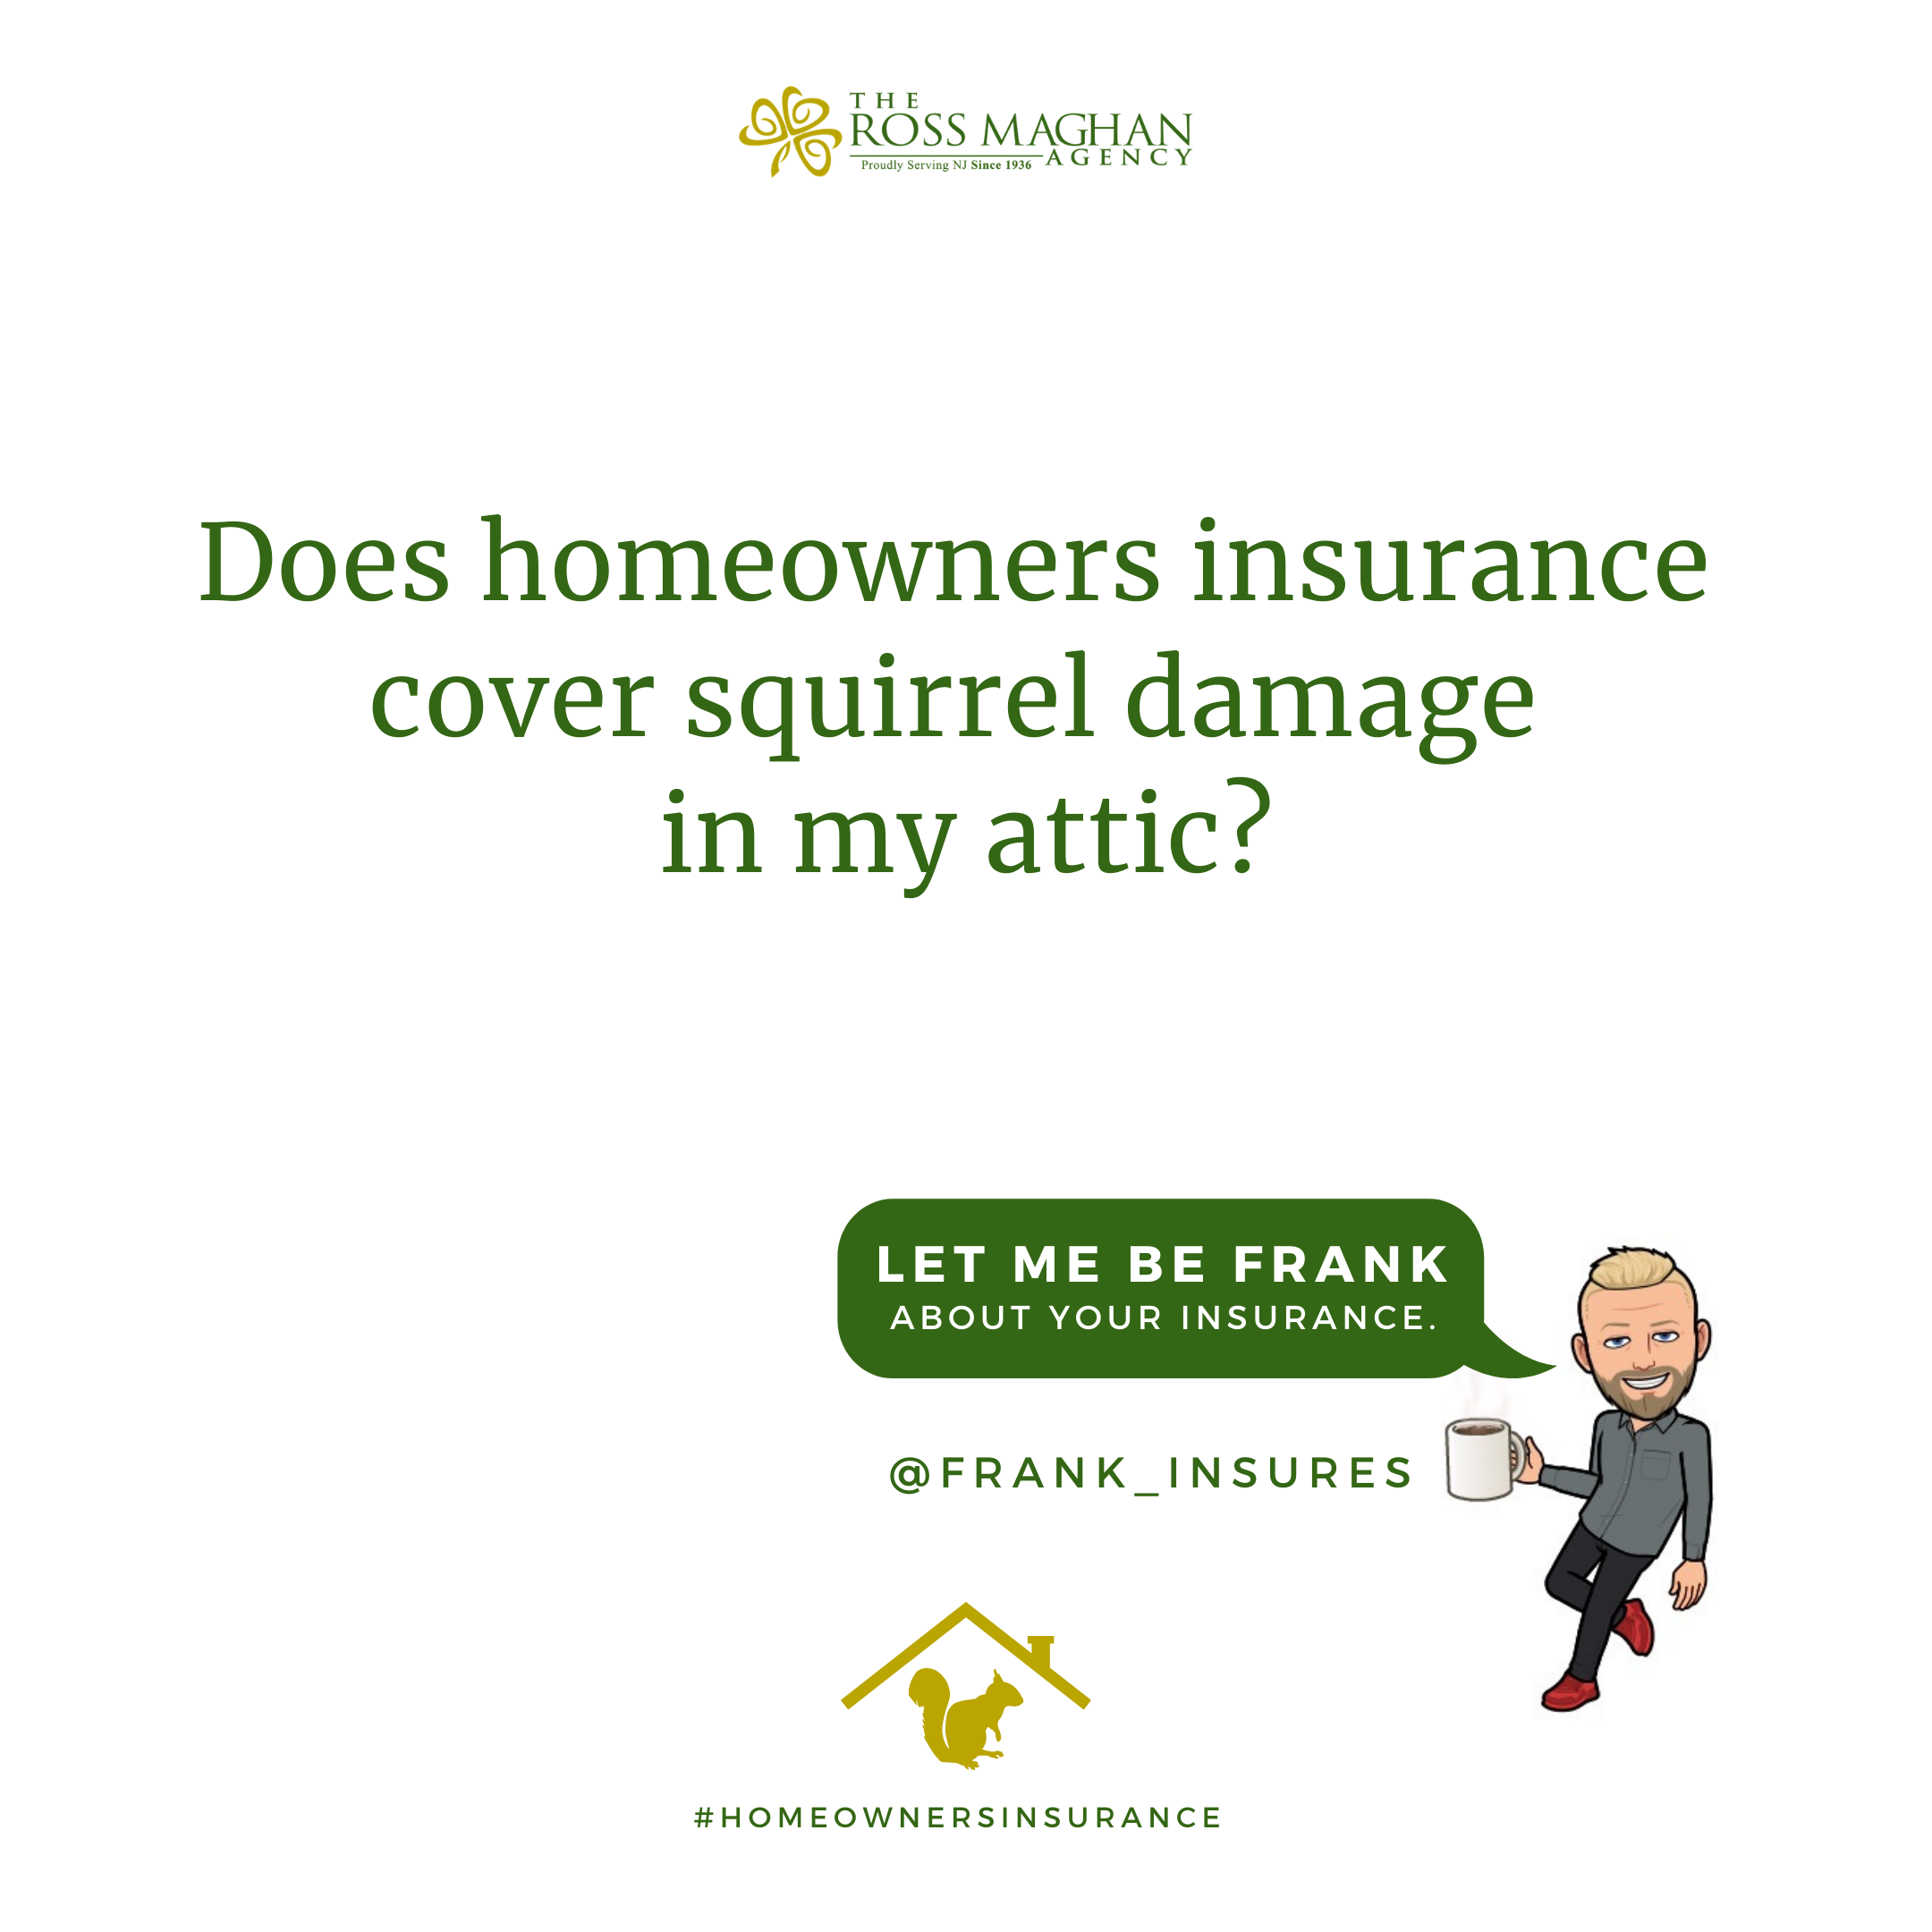 Featured image for “Does homeowners insurance cover squirrel damage in my attic?”